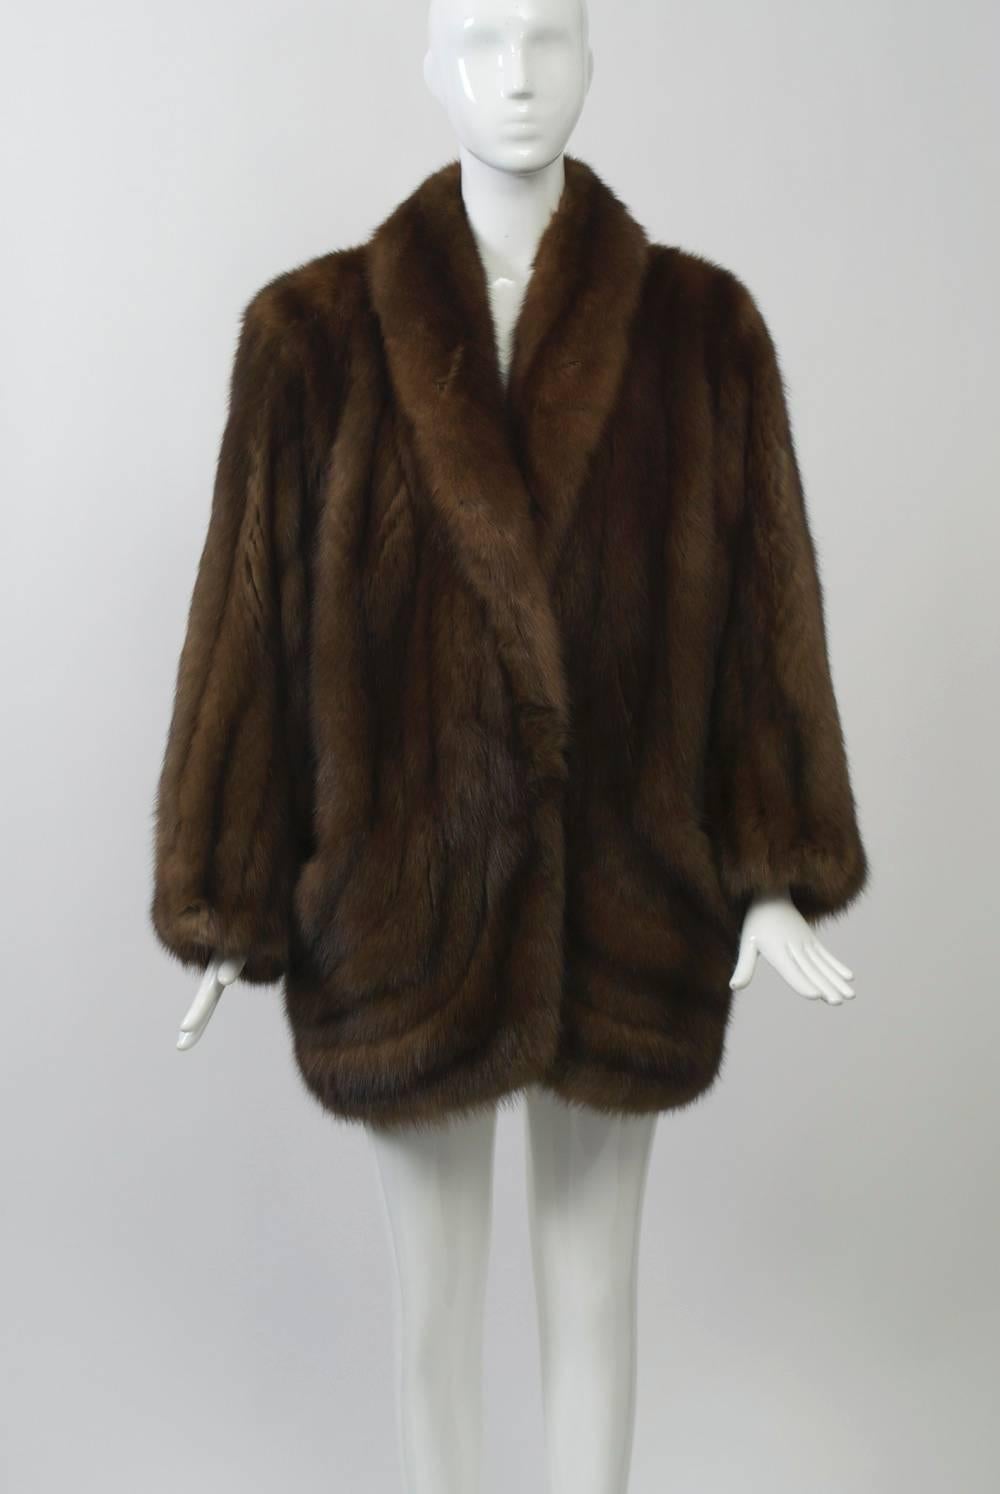 Luxe sable jacket features a shawl collar and curved skins at bottom front with small slash pockets. Dolman sleeves and loose fit allow for ease of wear. Nice medium brown skins. Mid-thigh length. Approximate size Medium.